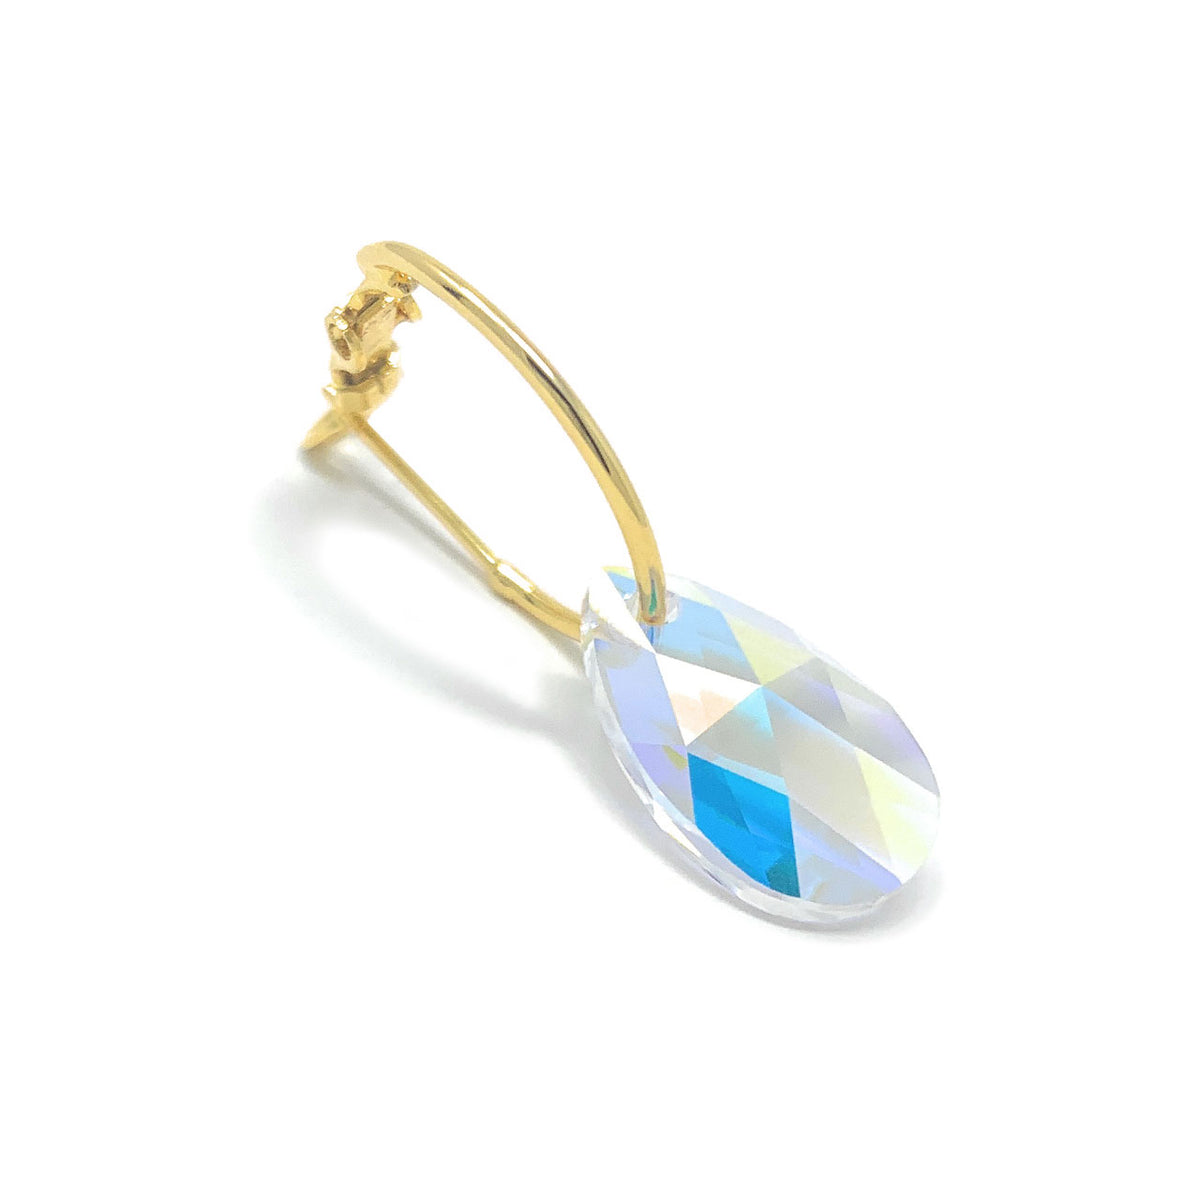 Aurora Small Drop Earrings with Clear Multicolor Aurore Boreale Pear Crystals from Swarovski Gold Plated - Ed Heart